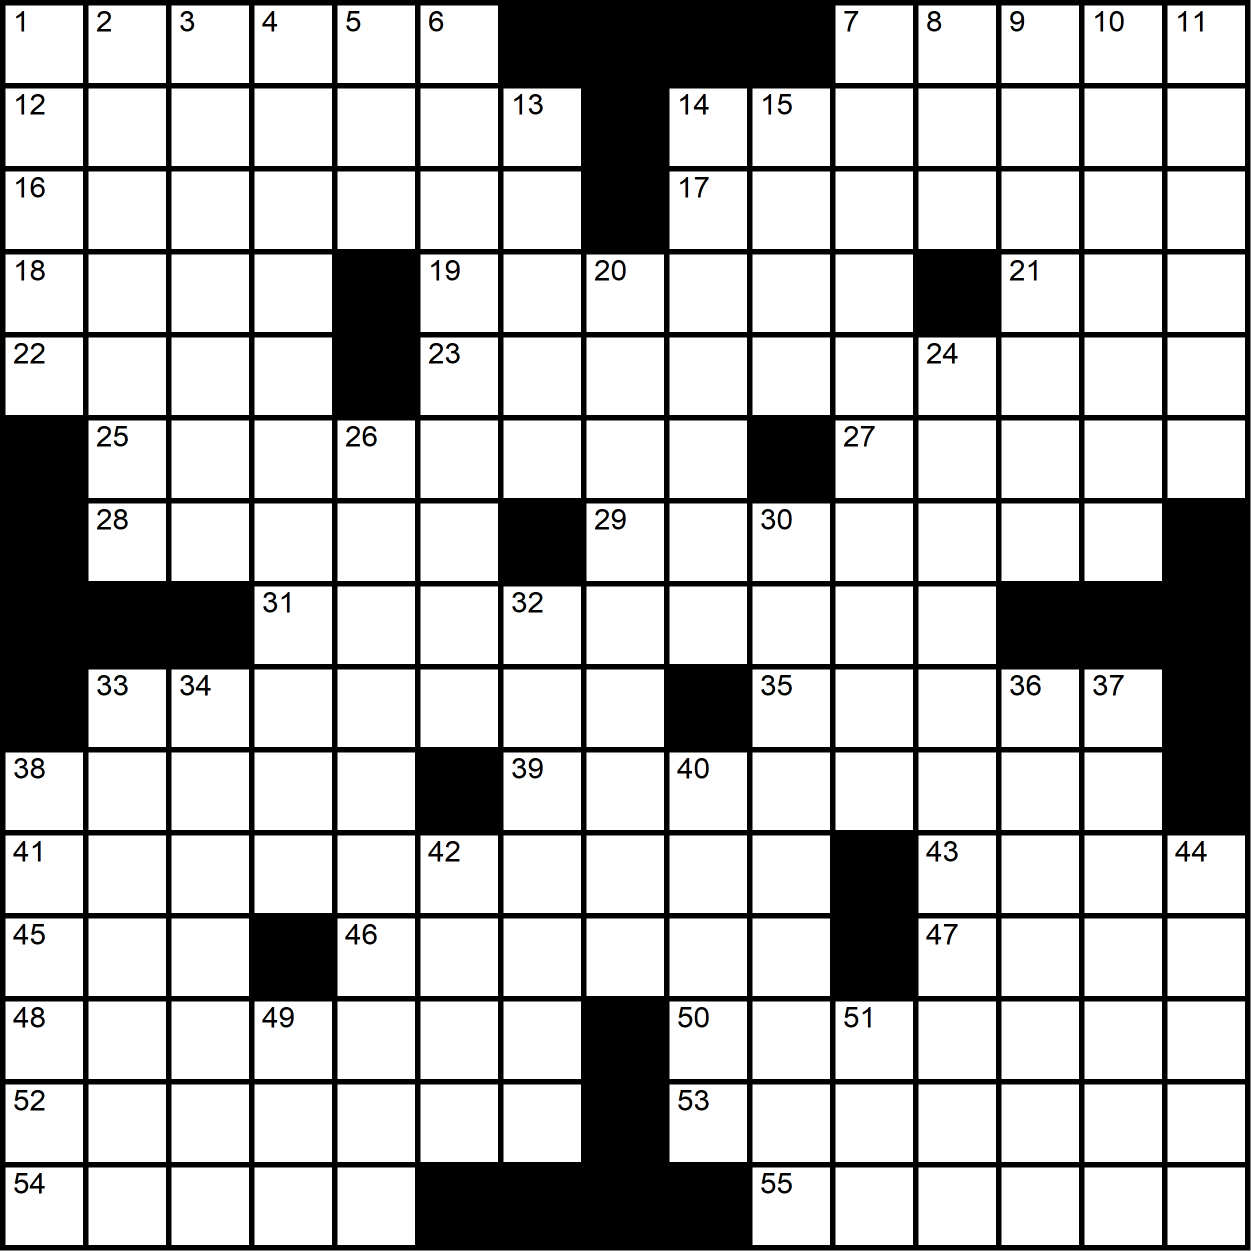 A 15x15 themeless crossword puzzle.